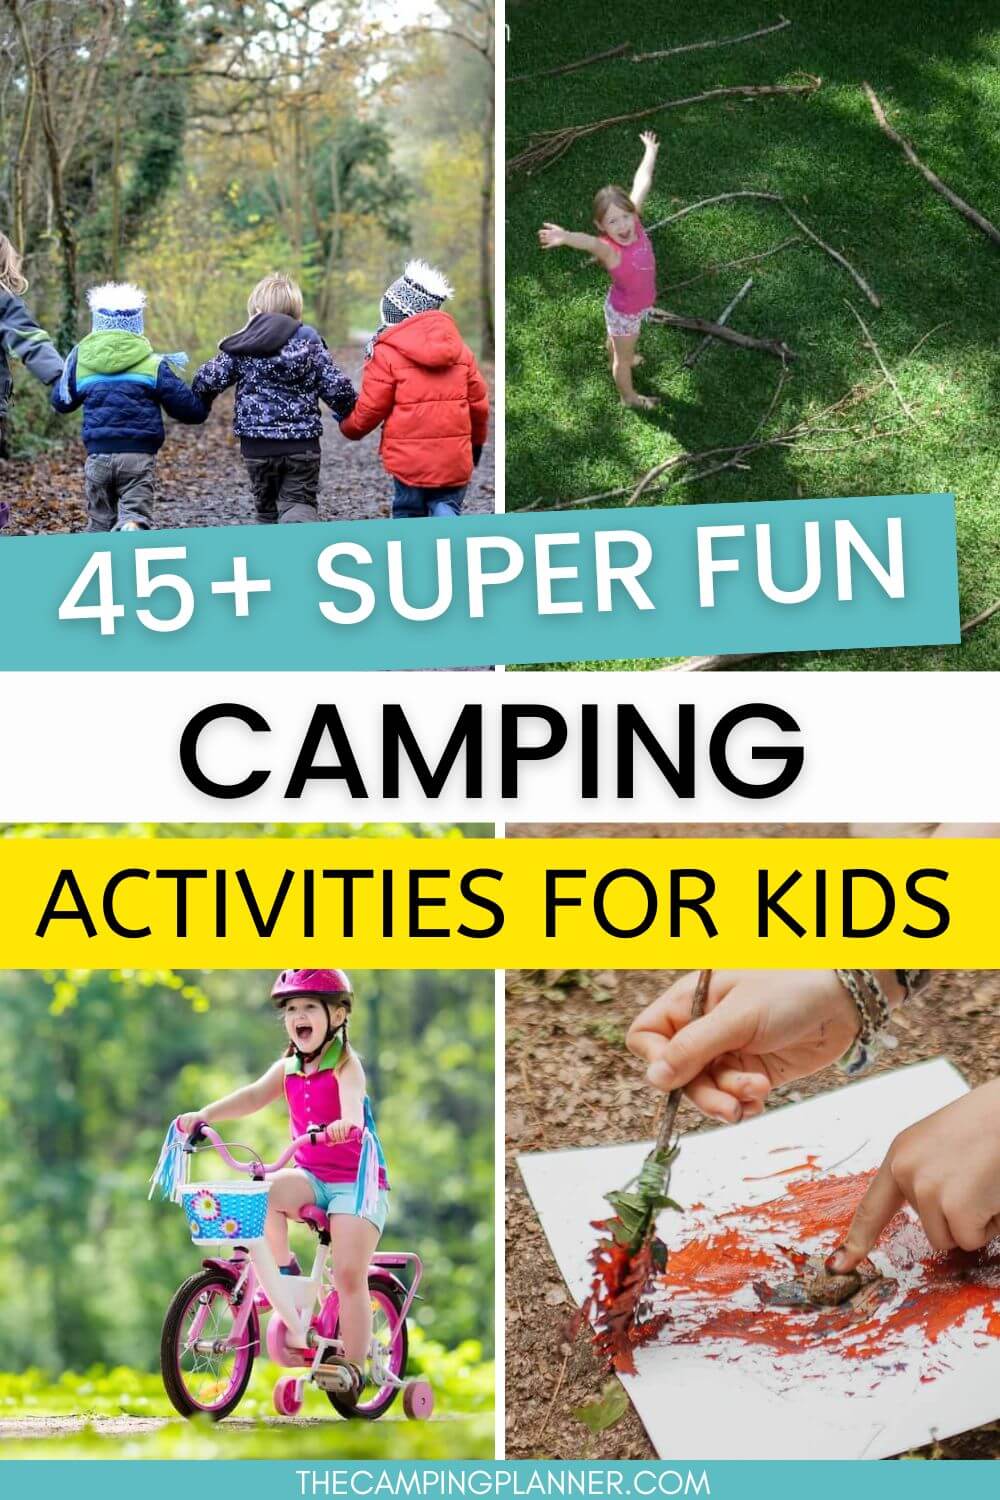 45+ super fun camping activities for kids pinterest image with collage and text.